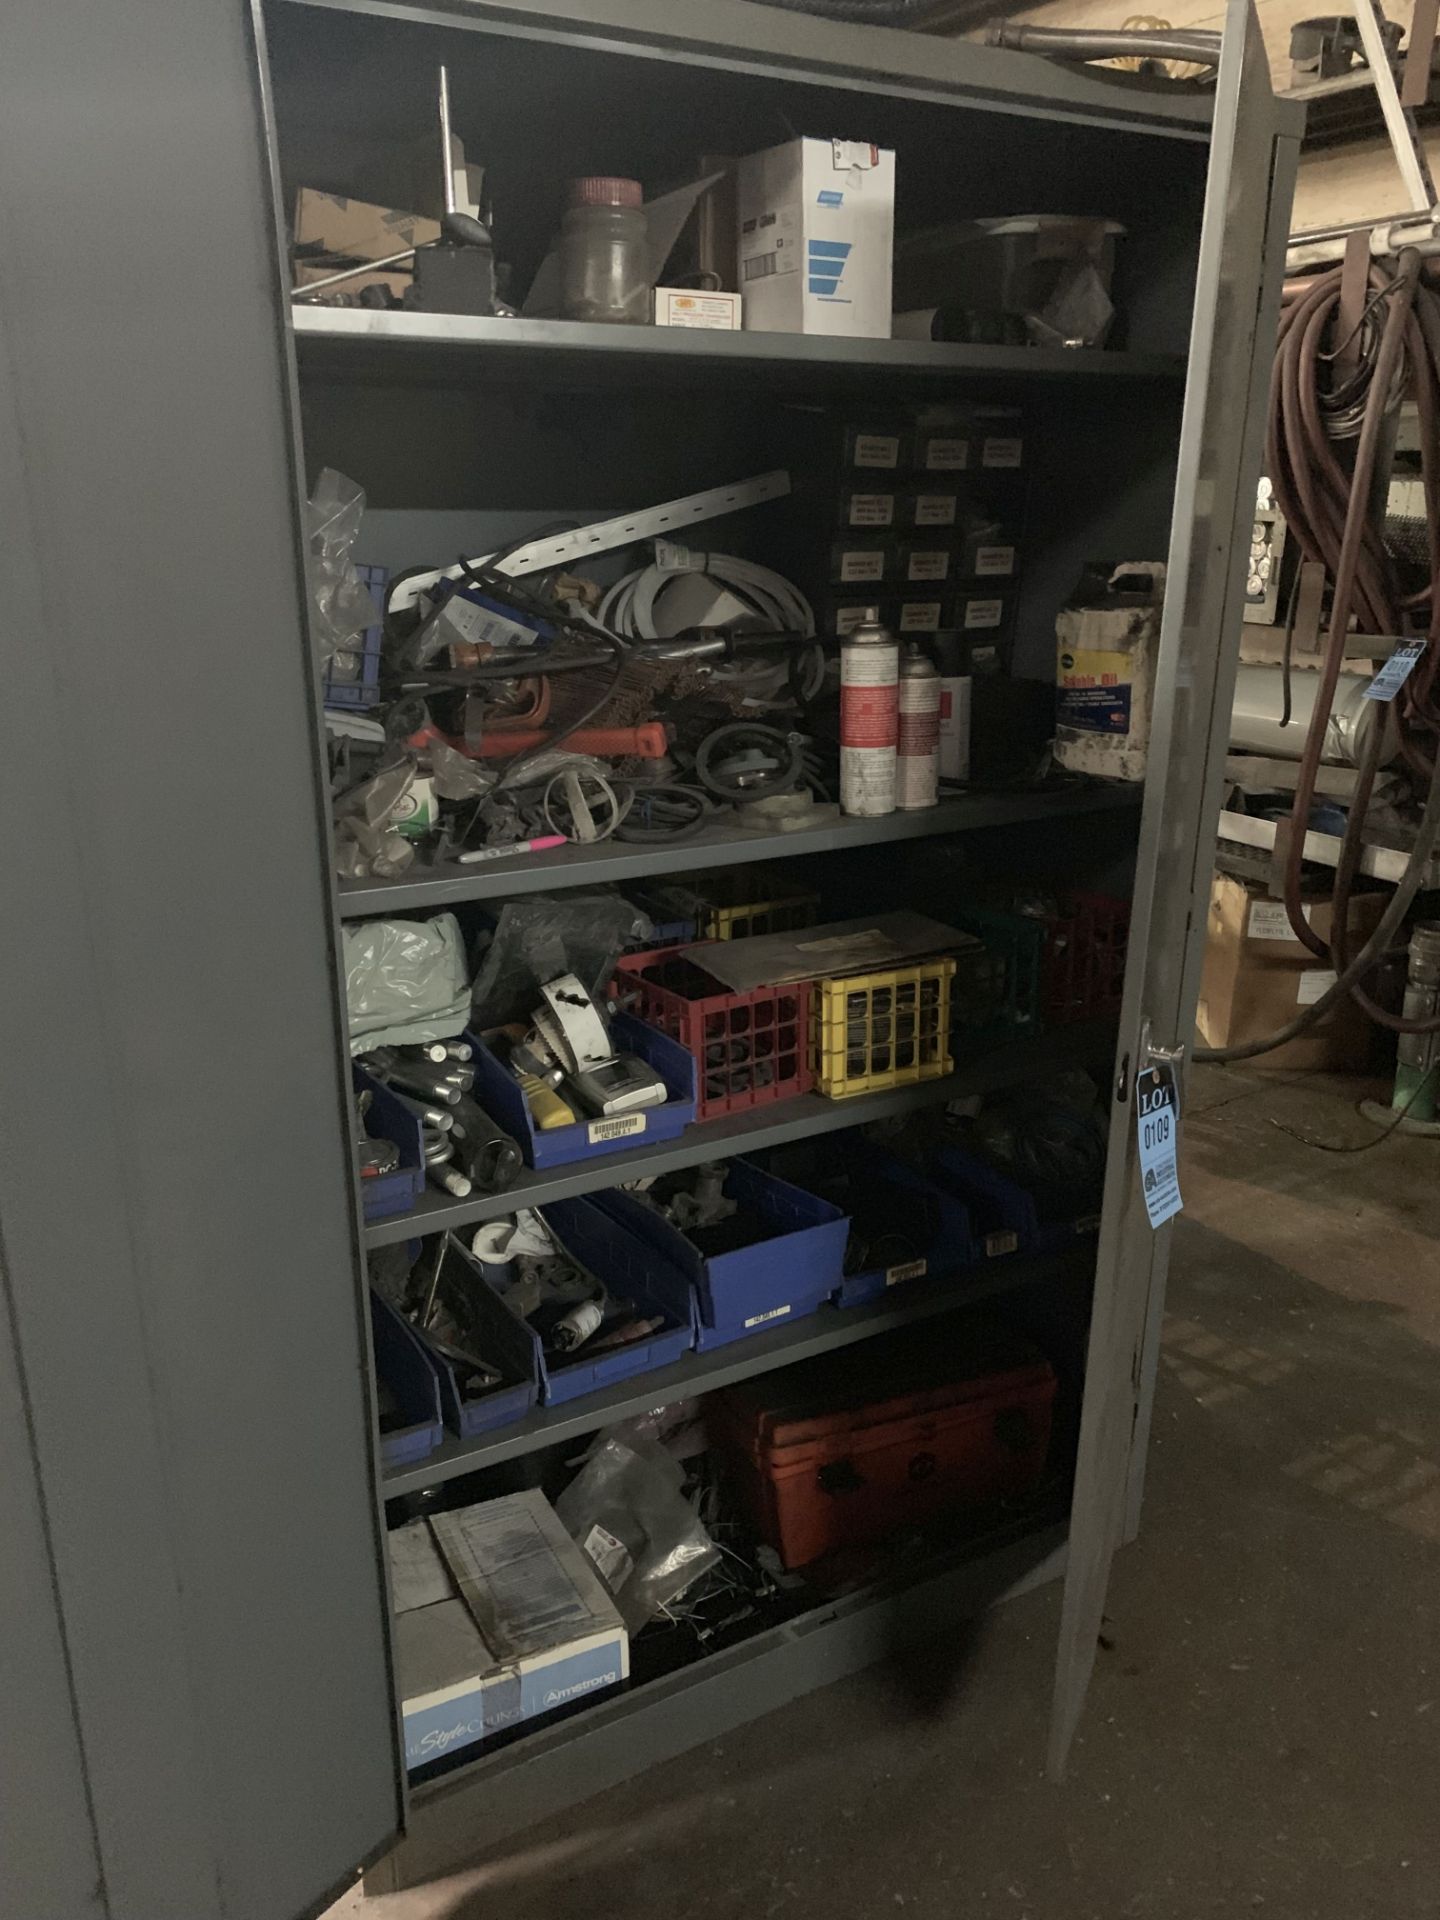 (LOT) REFRIGERATOR WITH WELDING SUPPLIES, 2-DOOR CABINET WITH MAINTENANCE ITEMS, AND RED CABINET